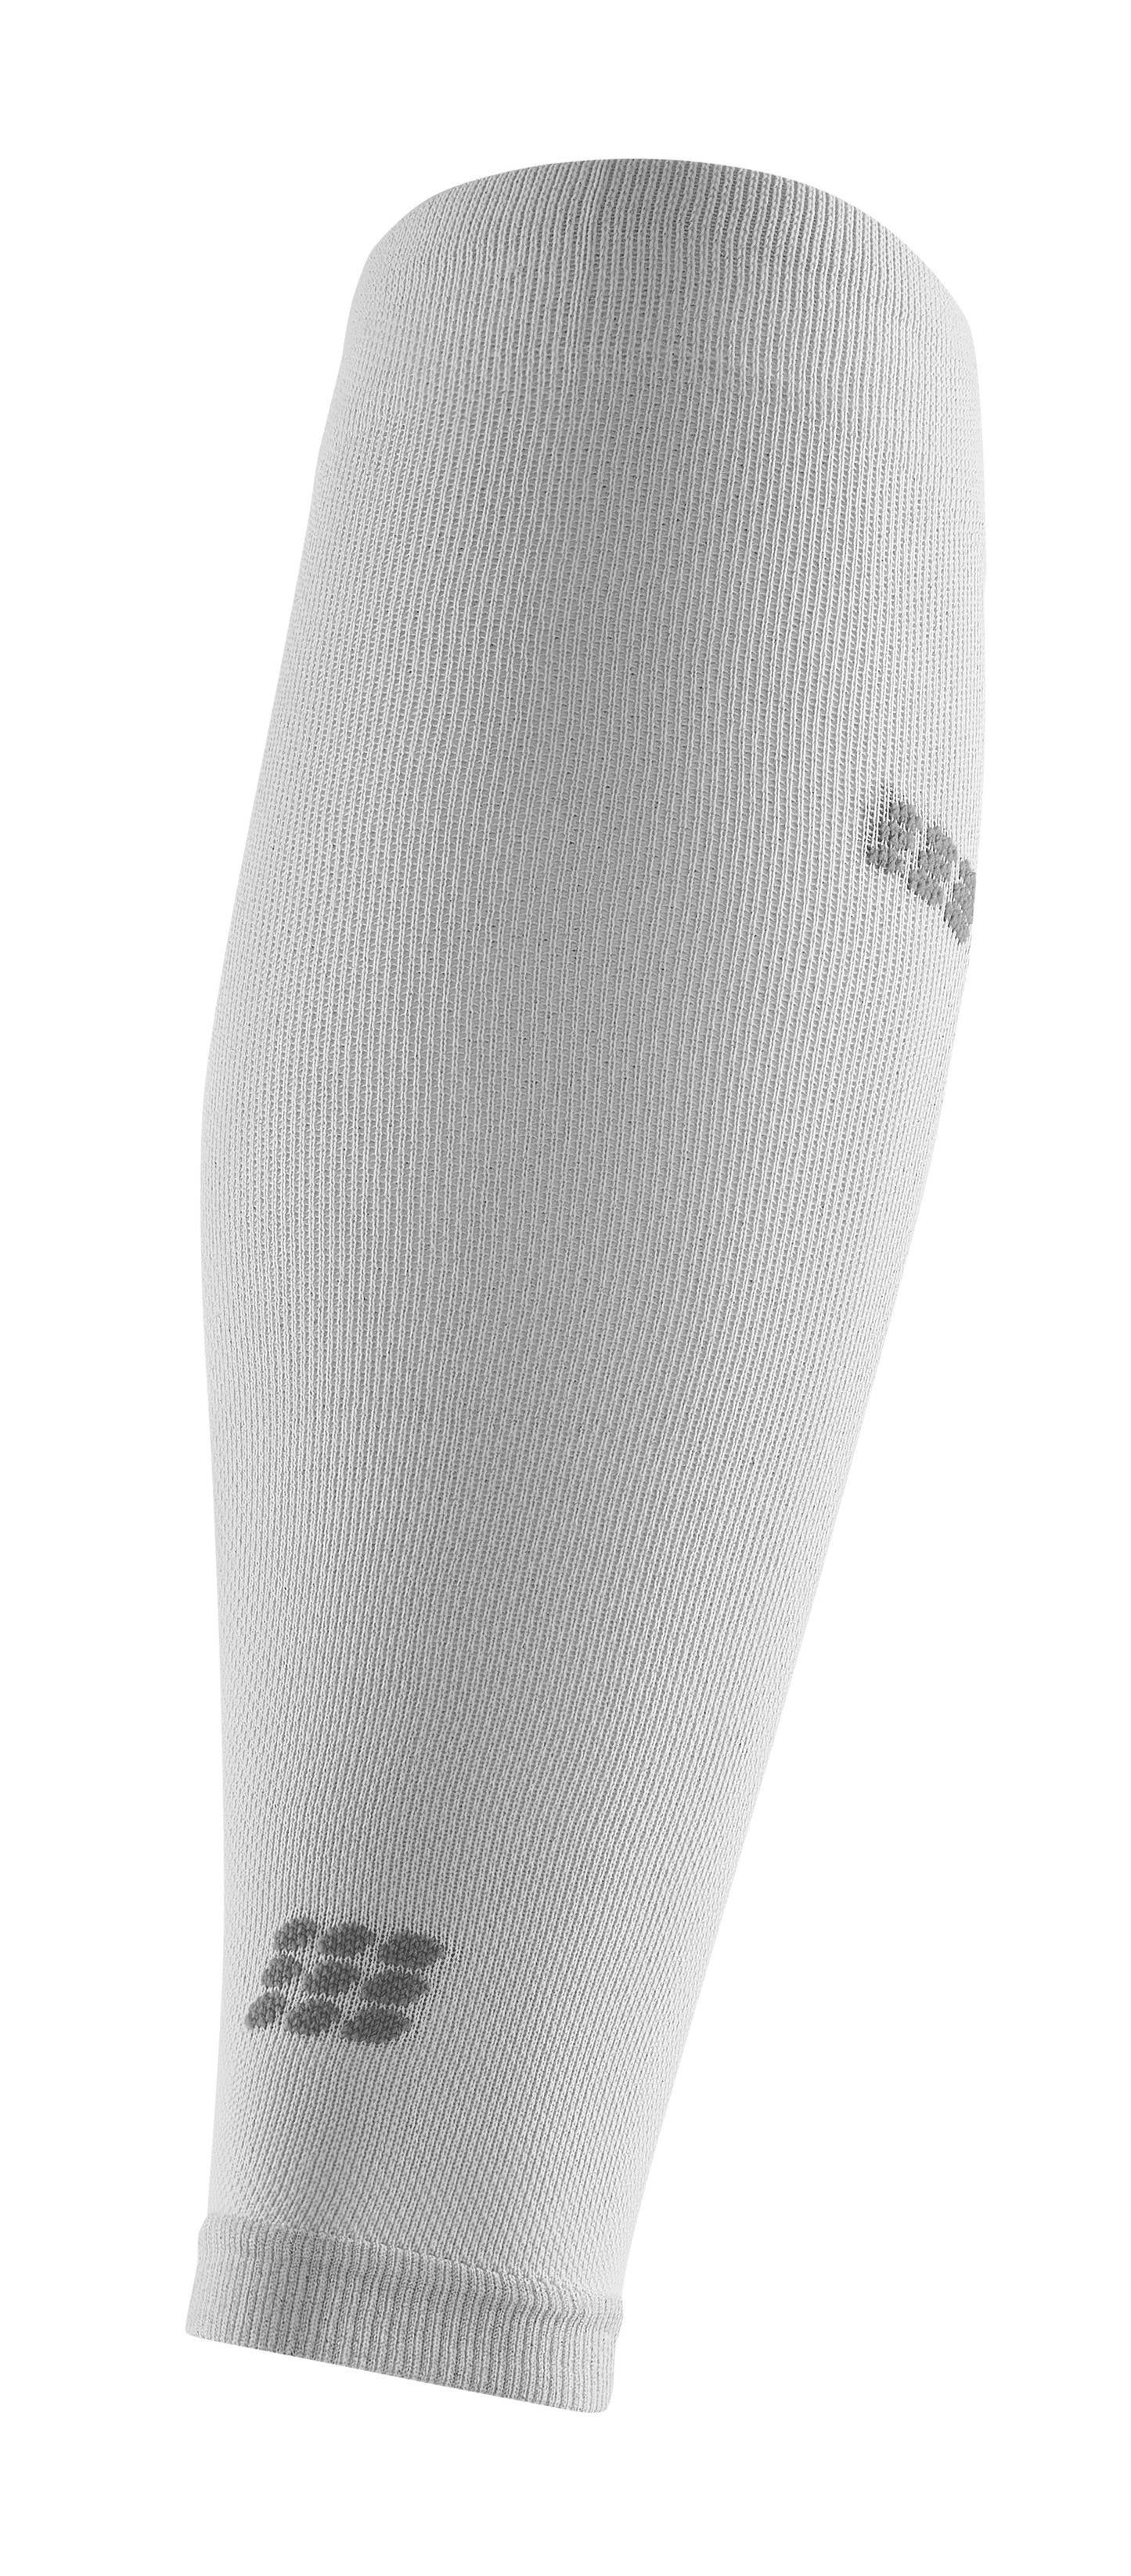 CEP Ultralight Compression Calf Sleeve Women's - Carbon White